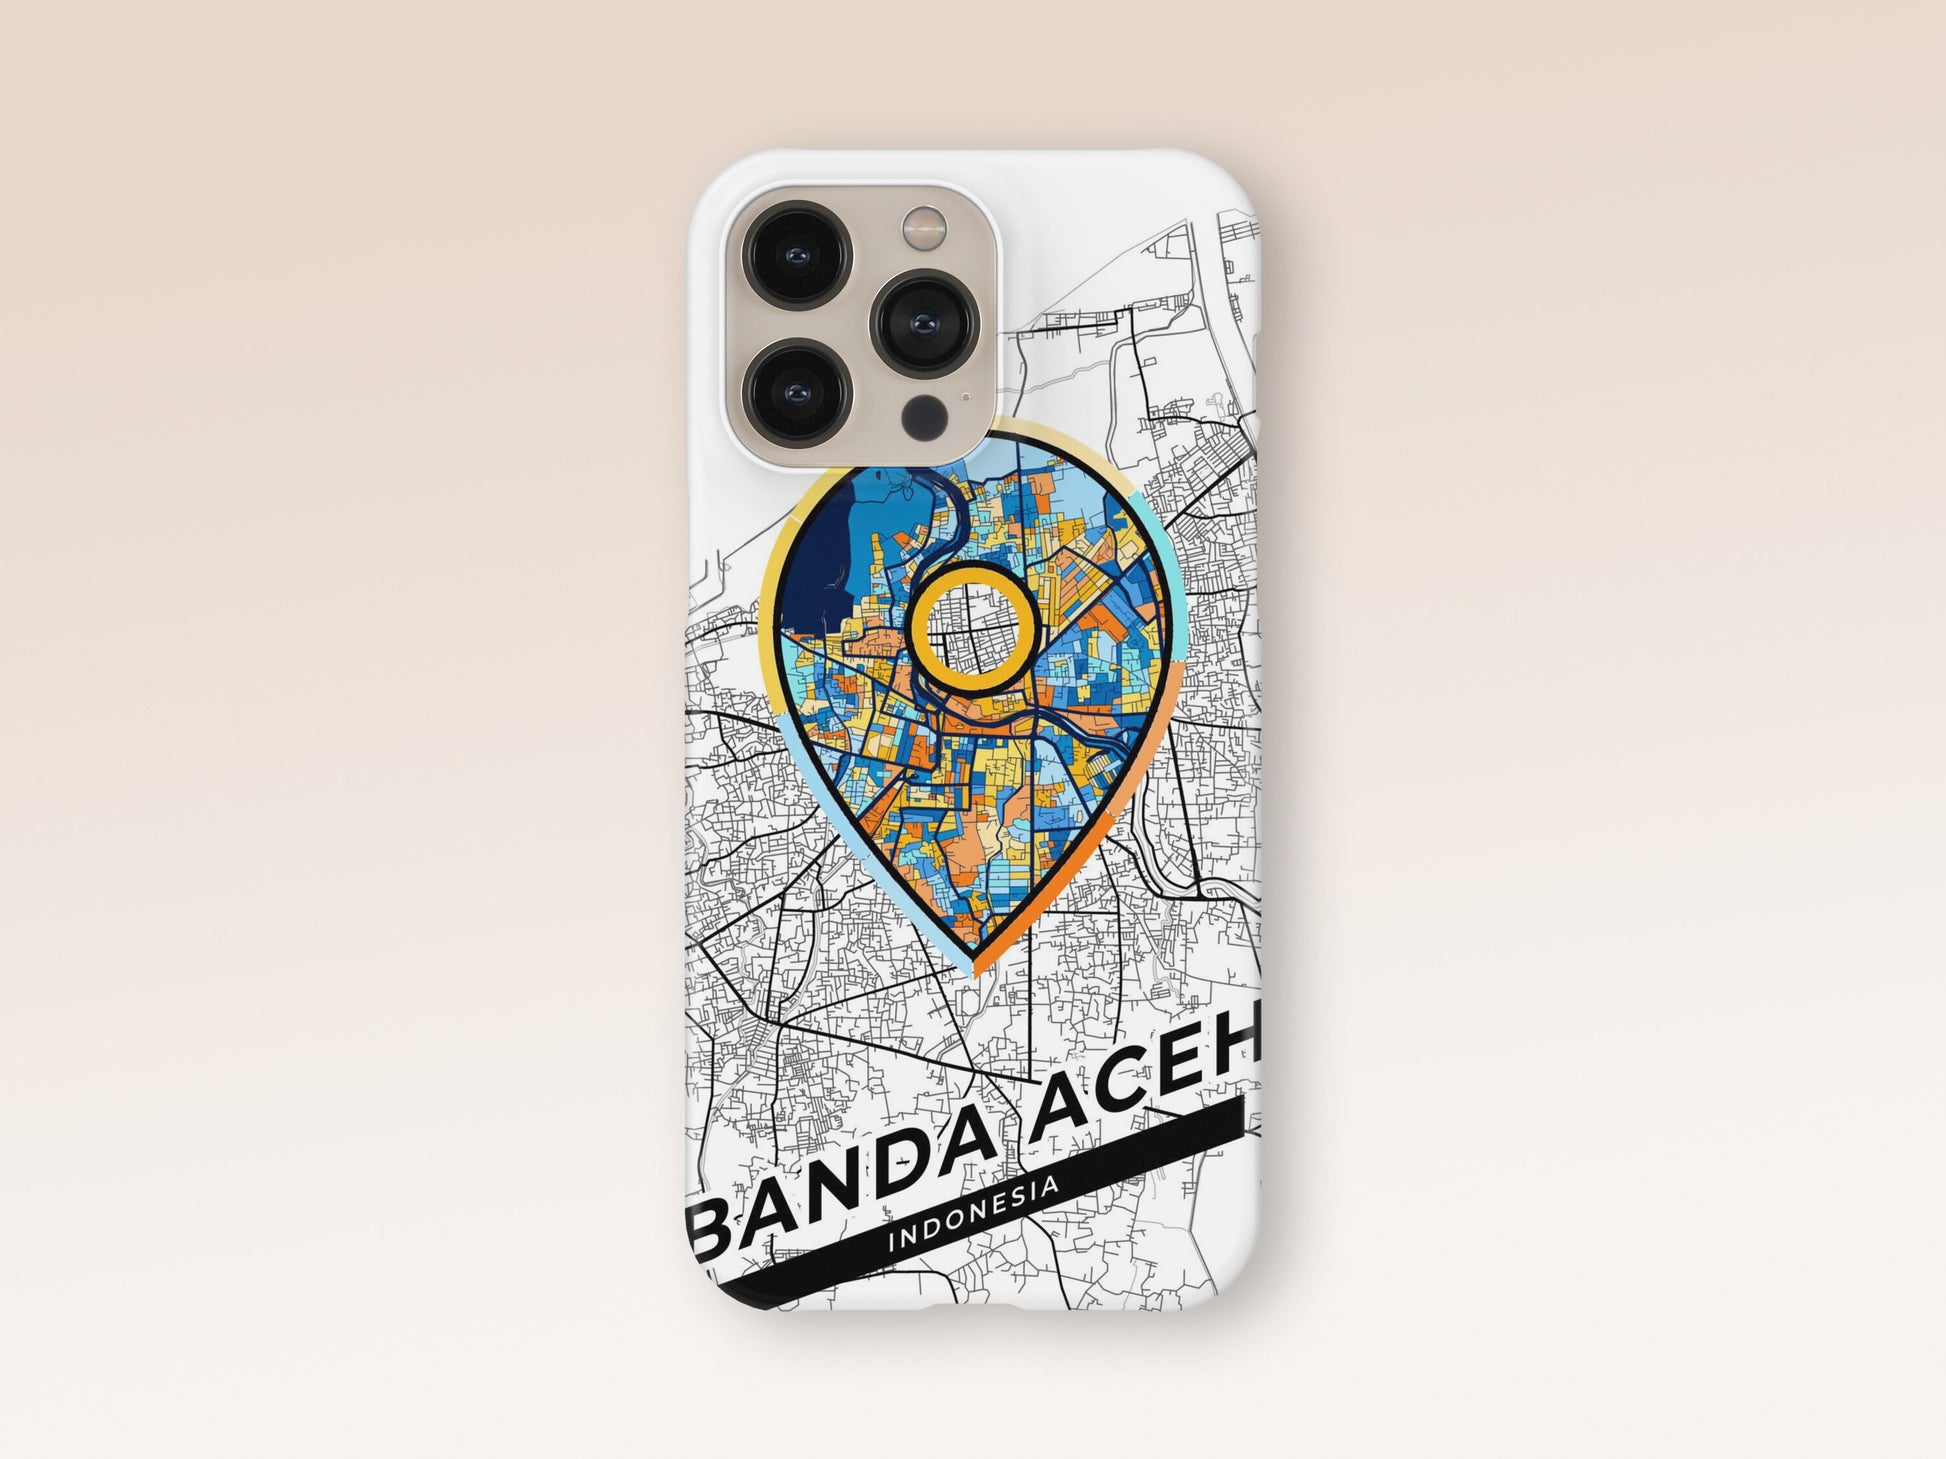 Banda Aceh Indonesia slim phone case with colorful icon. Birthday, wedding or housewarming gift. Couple match cases. 1